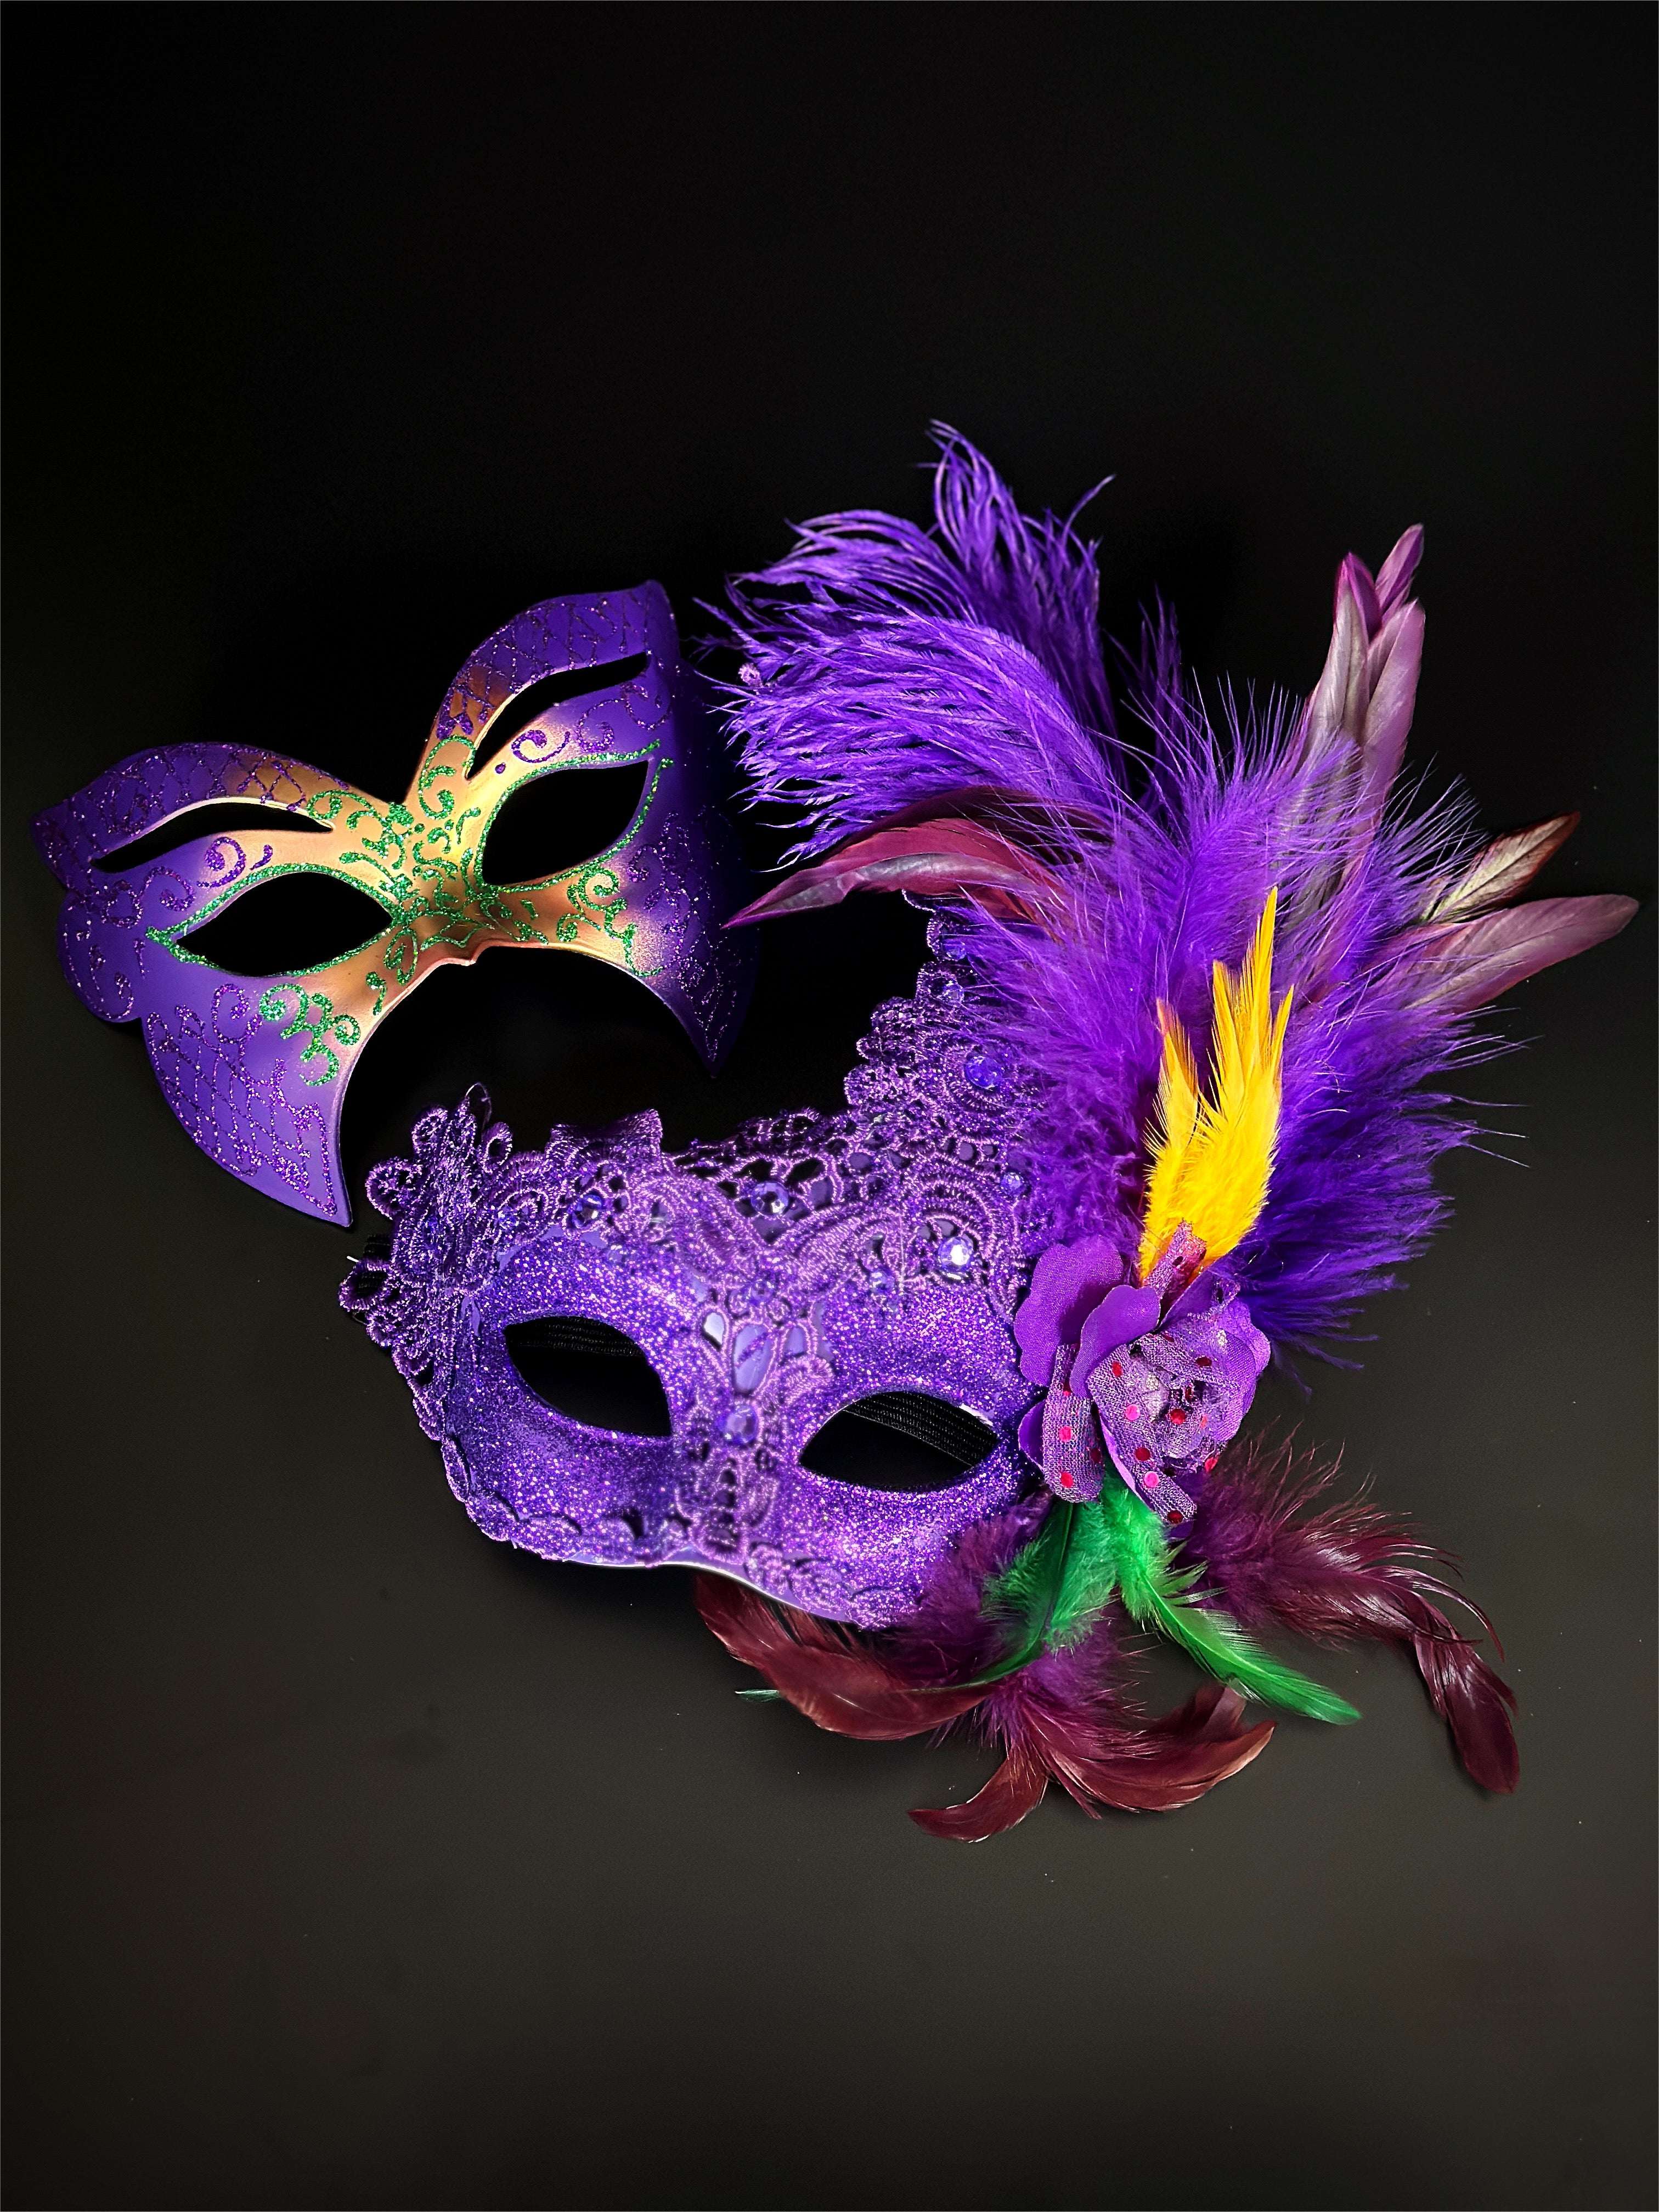 Couples mardi gras masquerade masks in purple, green, and gold